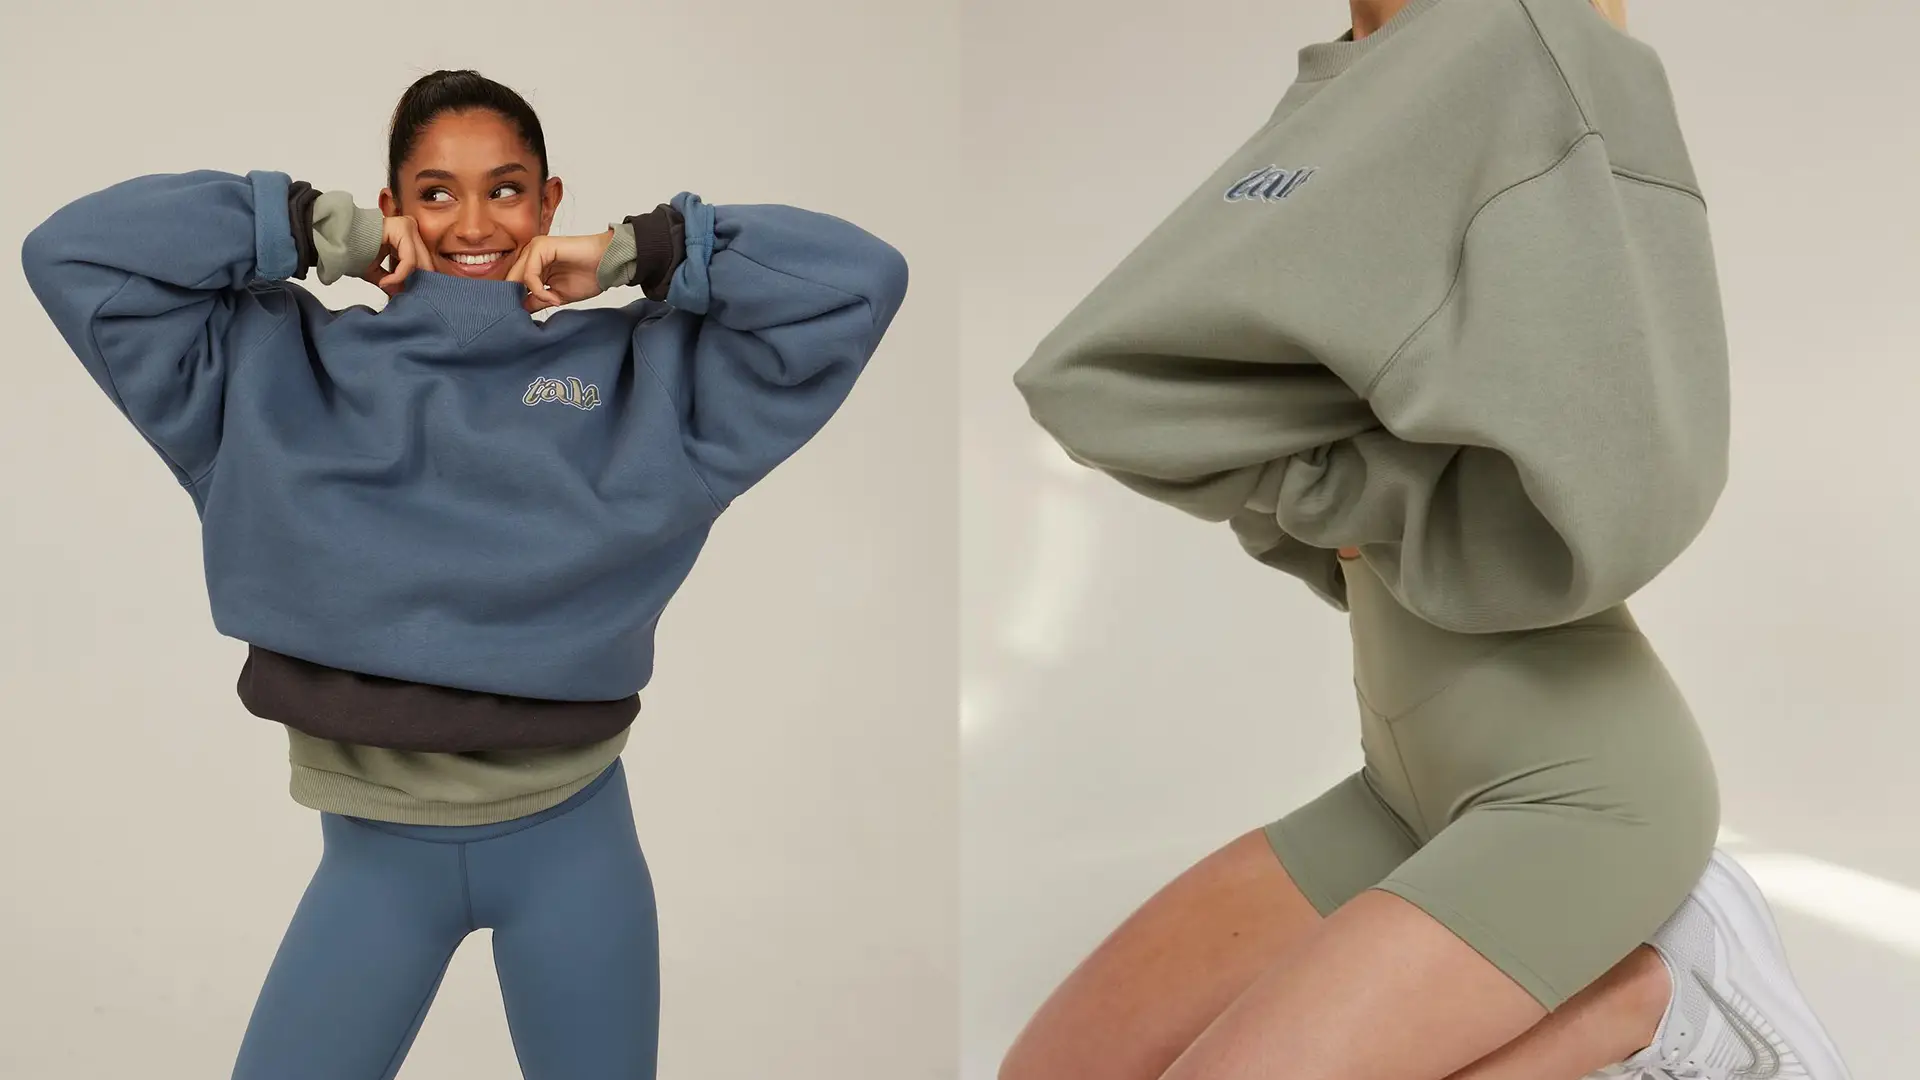 TALA Launches Court, a Vintage-Inspired Athleisure Range